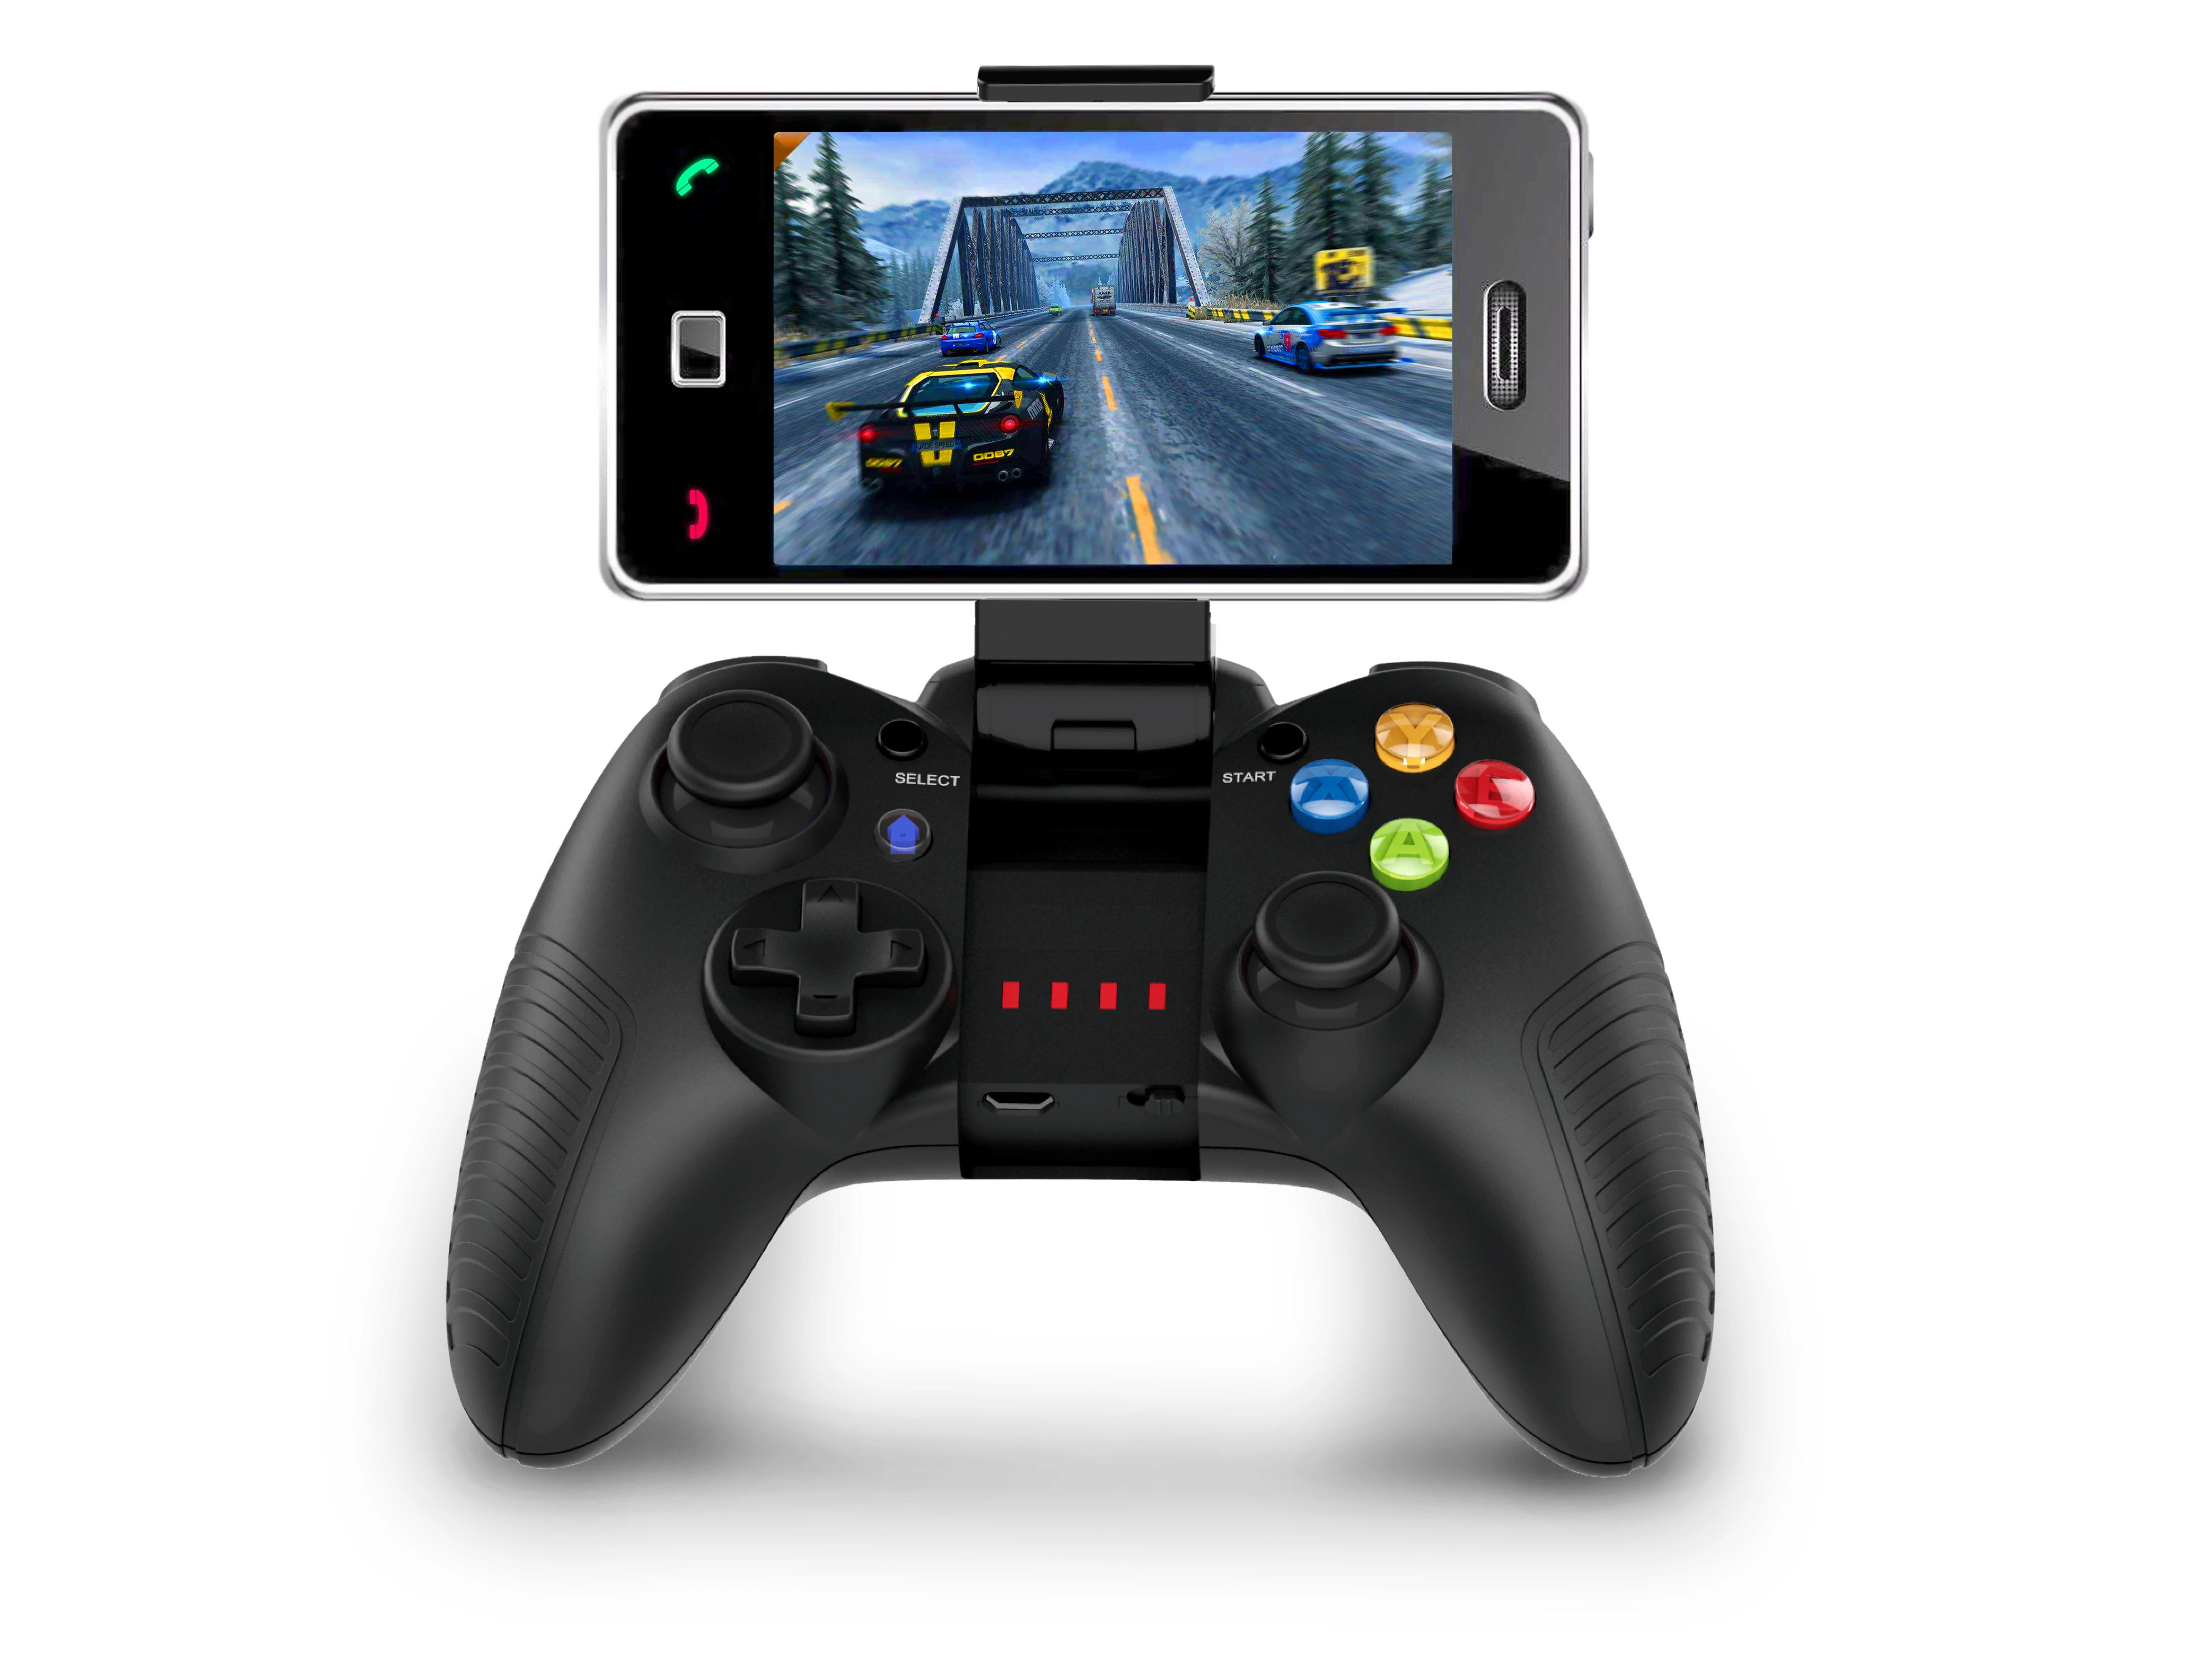 1PCS Bluetooth Game Controller Joystick for Andriod3.2/iOS6.0 or above for Cell Phone Tablet PC Mini PC TV BOX|joystick joysticks|joystick for laptopjoystick gamepad -